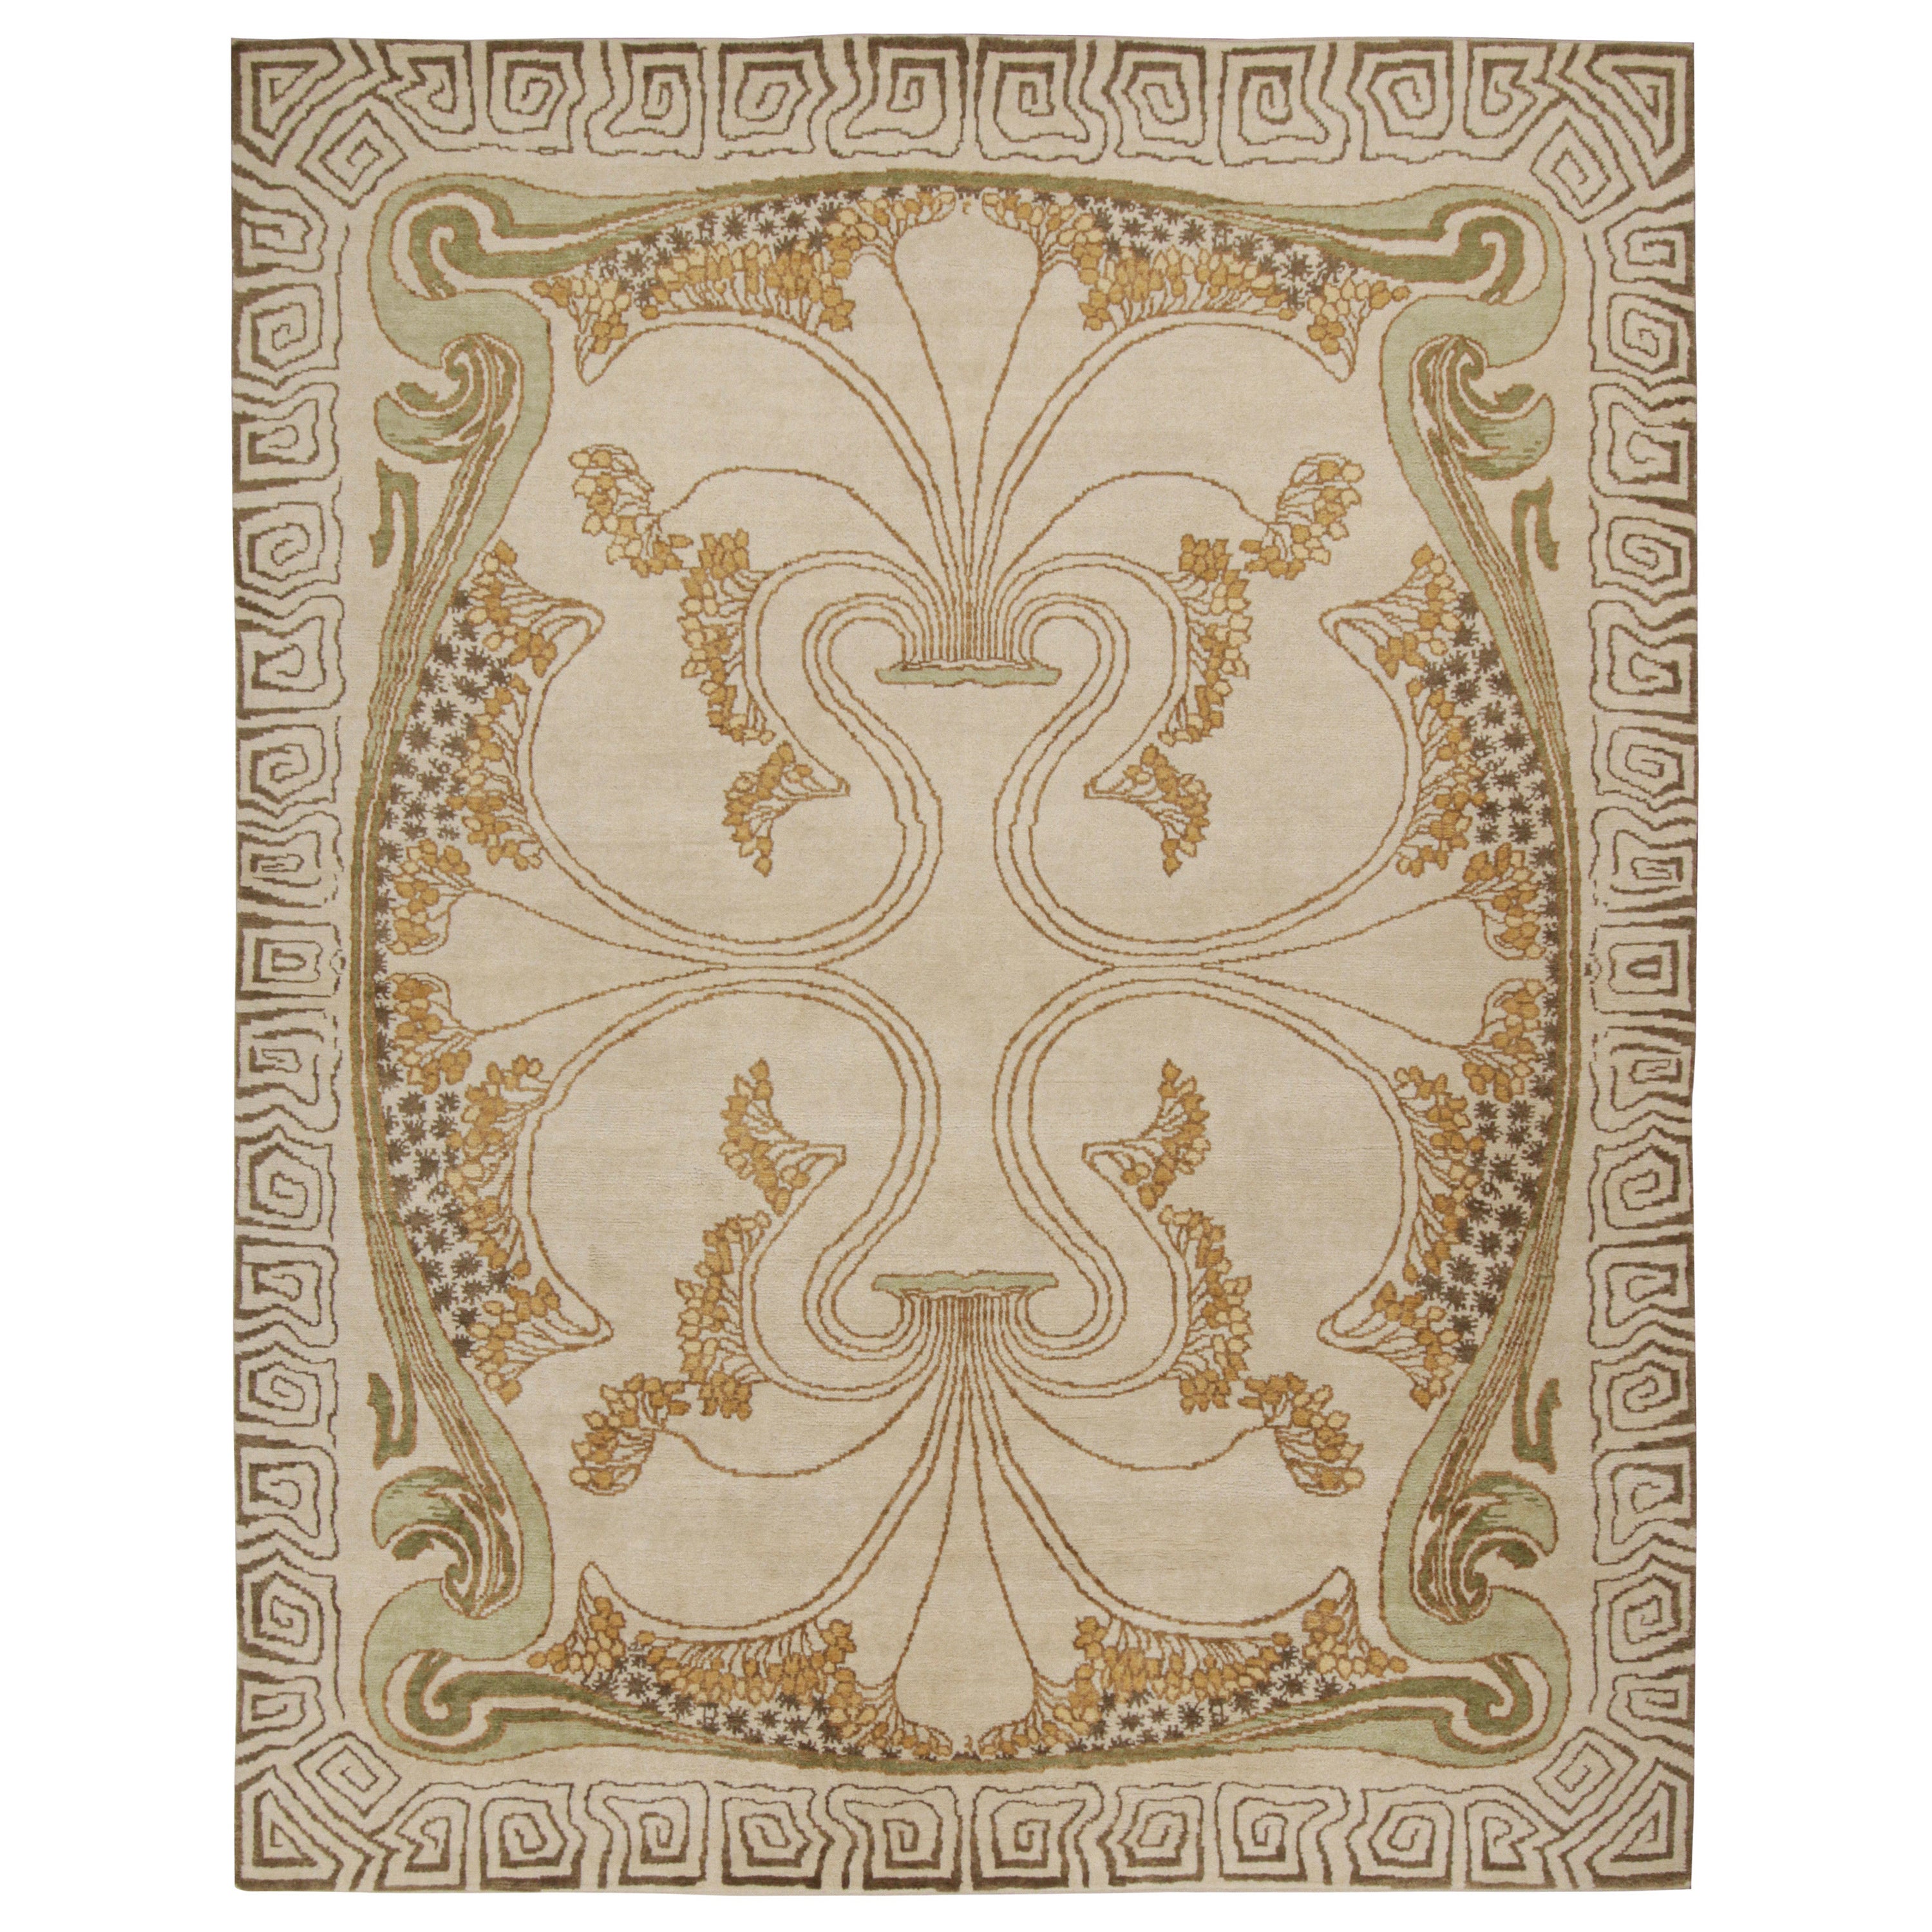 Rug & Kilim's French Style Art Deco Teppich in Creme & Gold Geometrische Muster